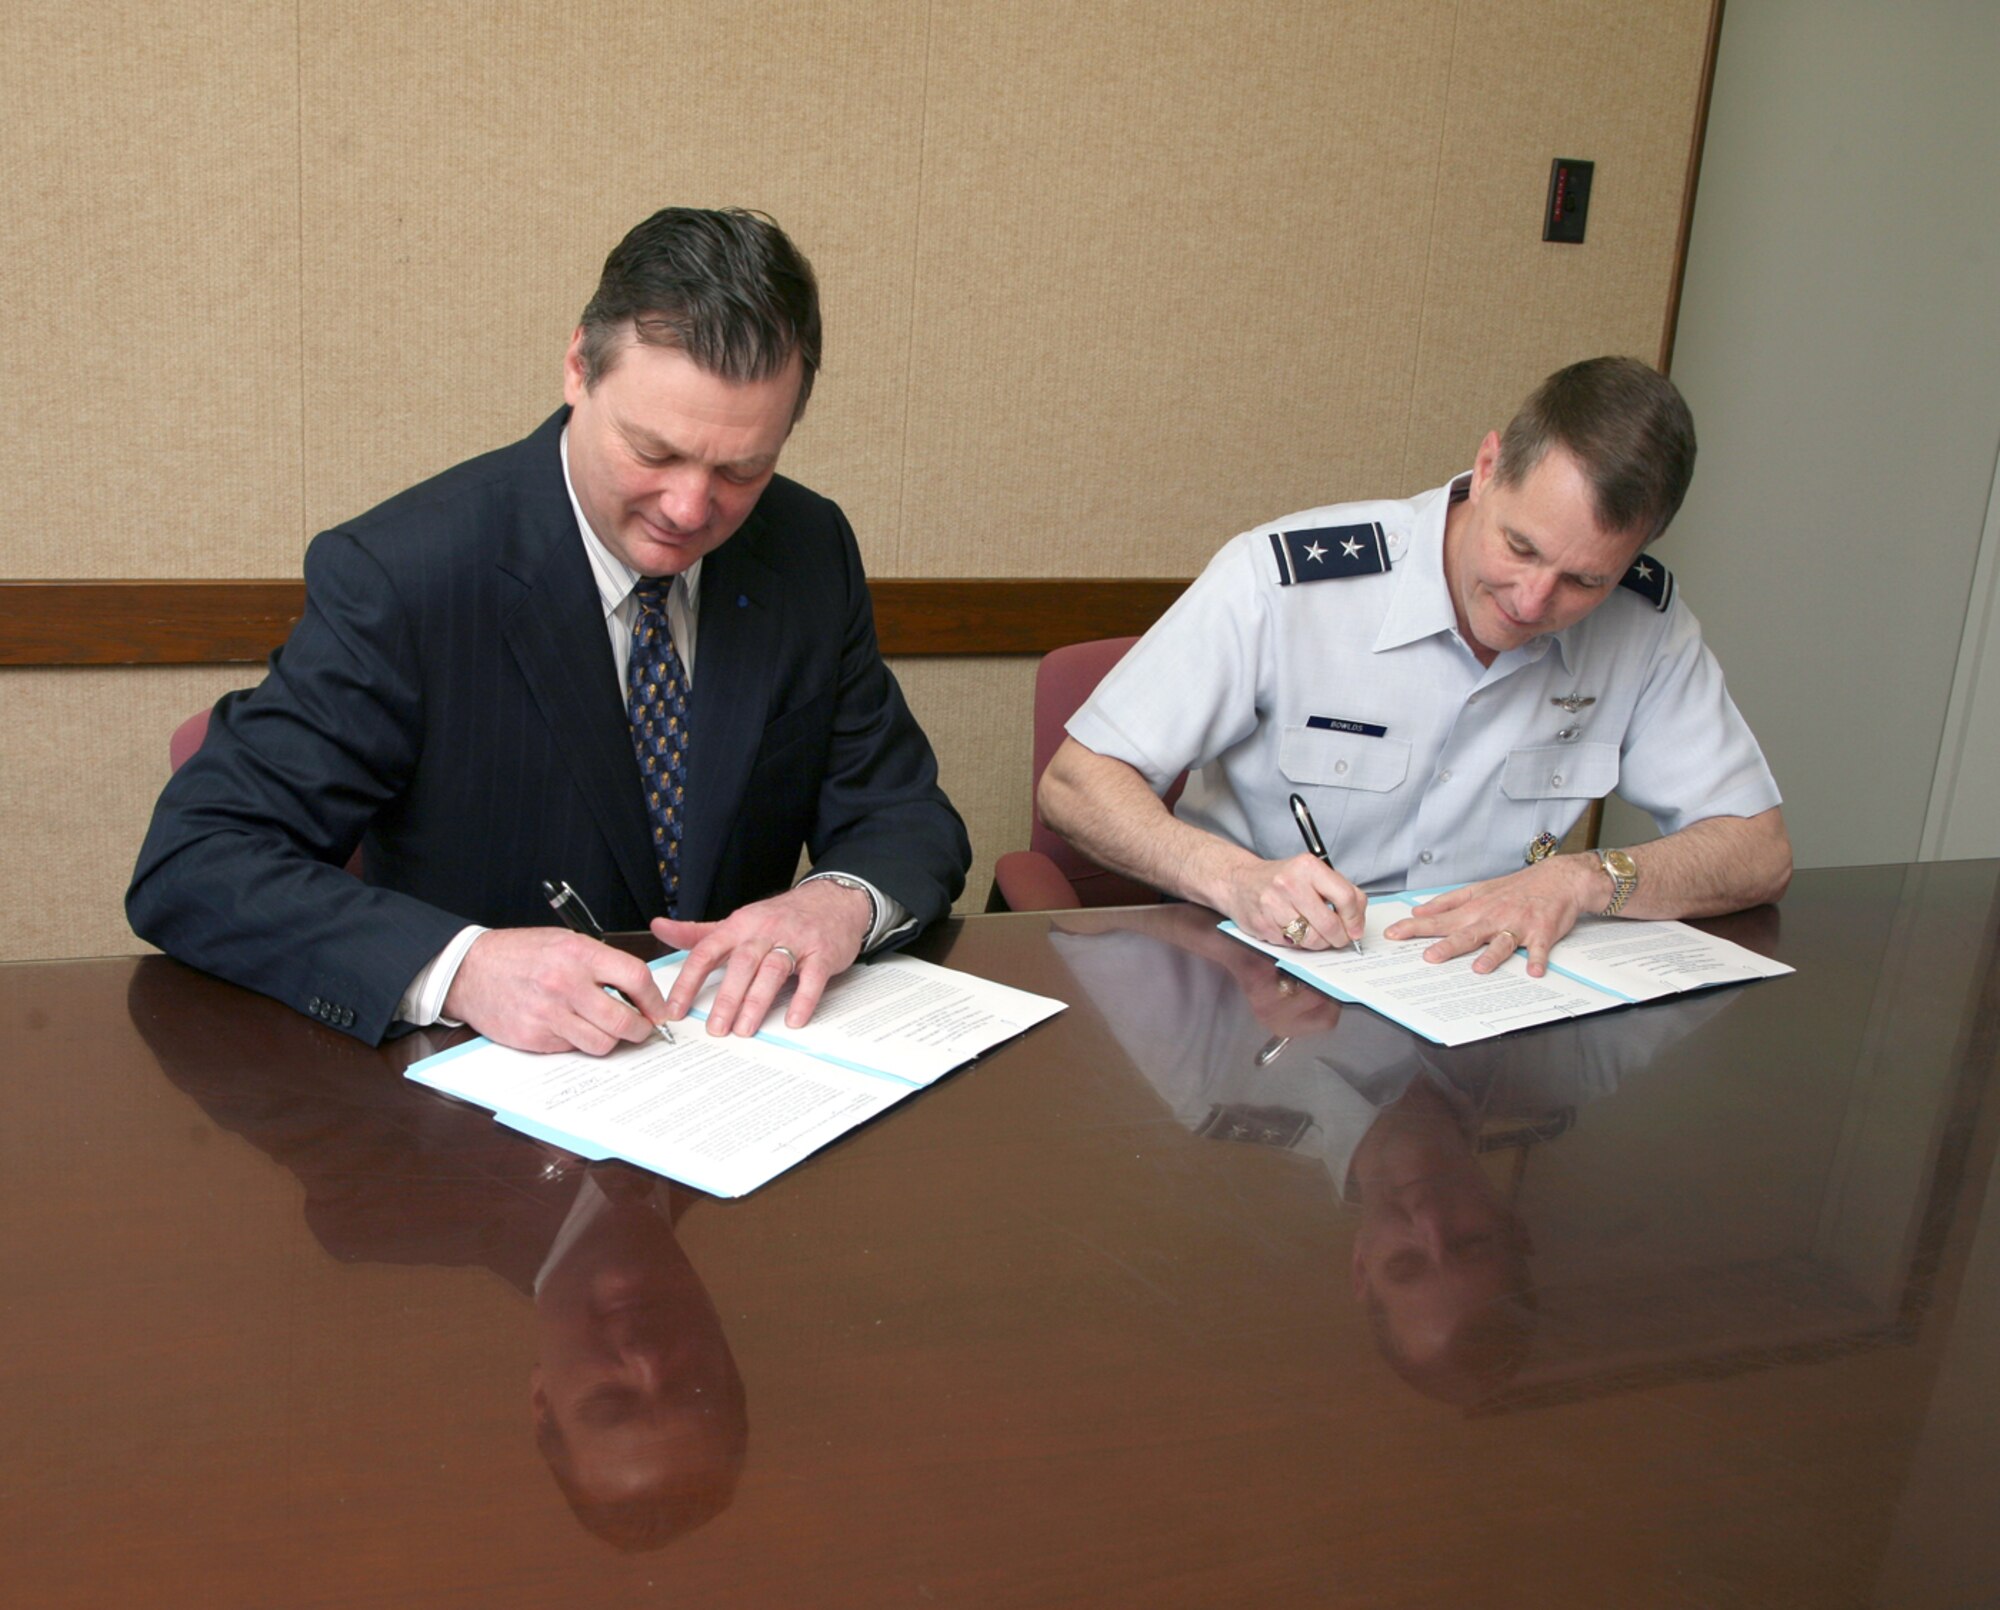 The commander of AFRL, Maj. Gen. Ted Bowlds and director of ORNL, Jeff Wadsworth signed the Memorandum of Understanding March 23 and expect the agreement to improve the cost, schedule and performance goals associated with developing critical technologies for the nation through the coordination of related efforts and information exchanges.